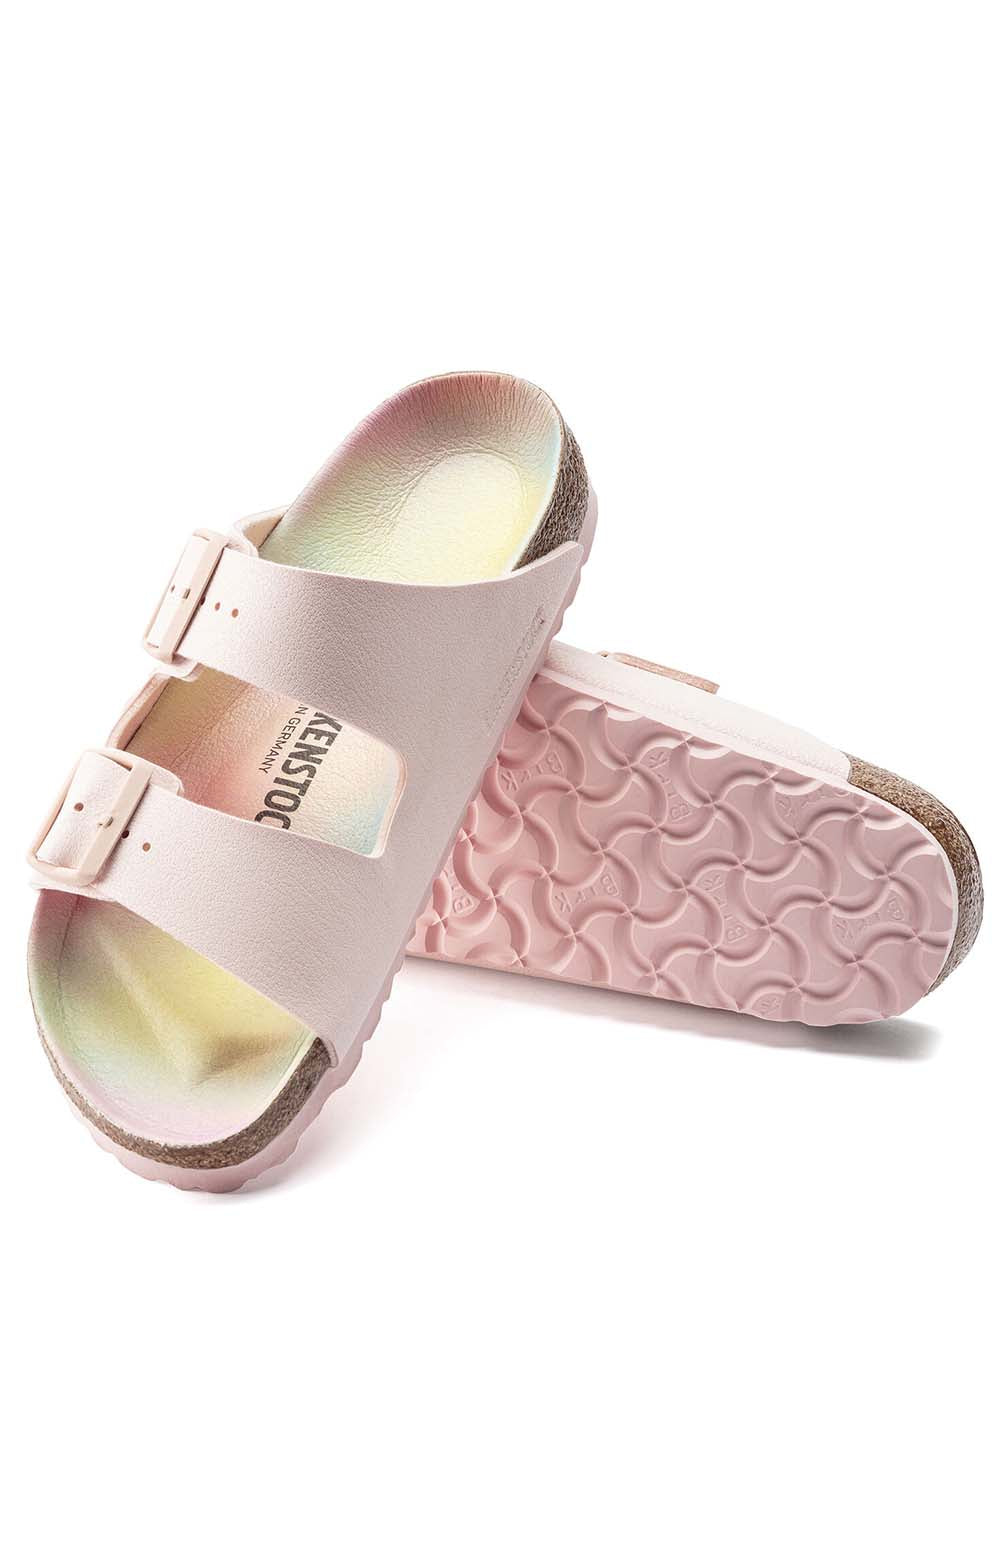 Stylish and eco-friendly Arizona Vegan Sandals in light rose, perfect for summer